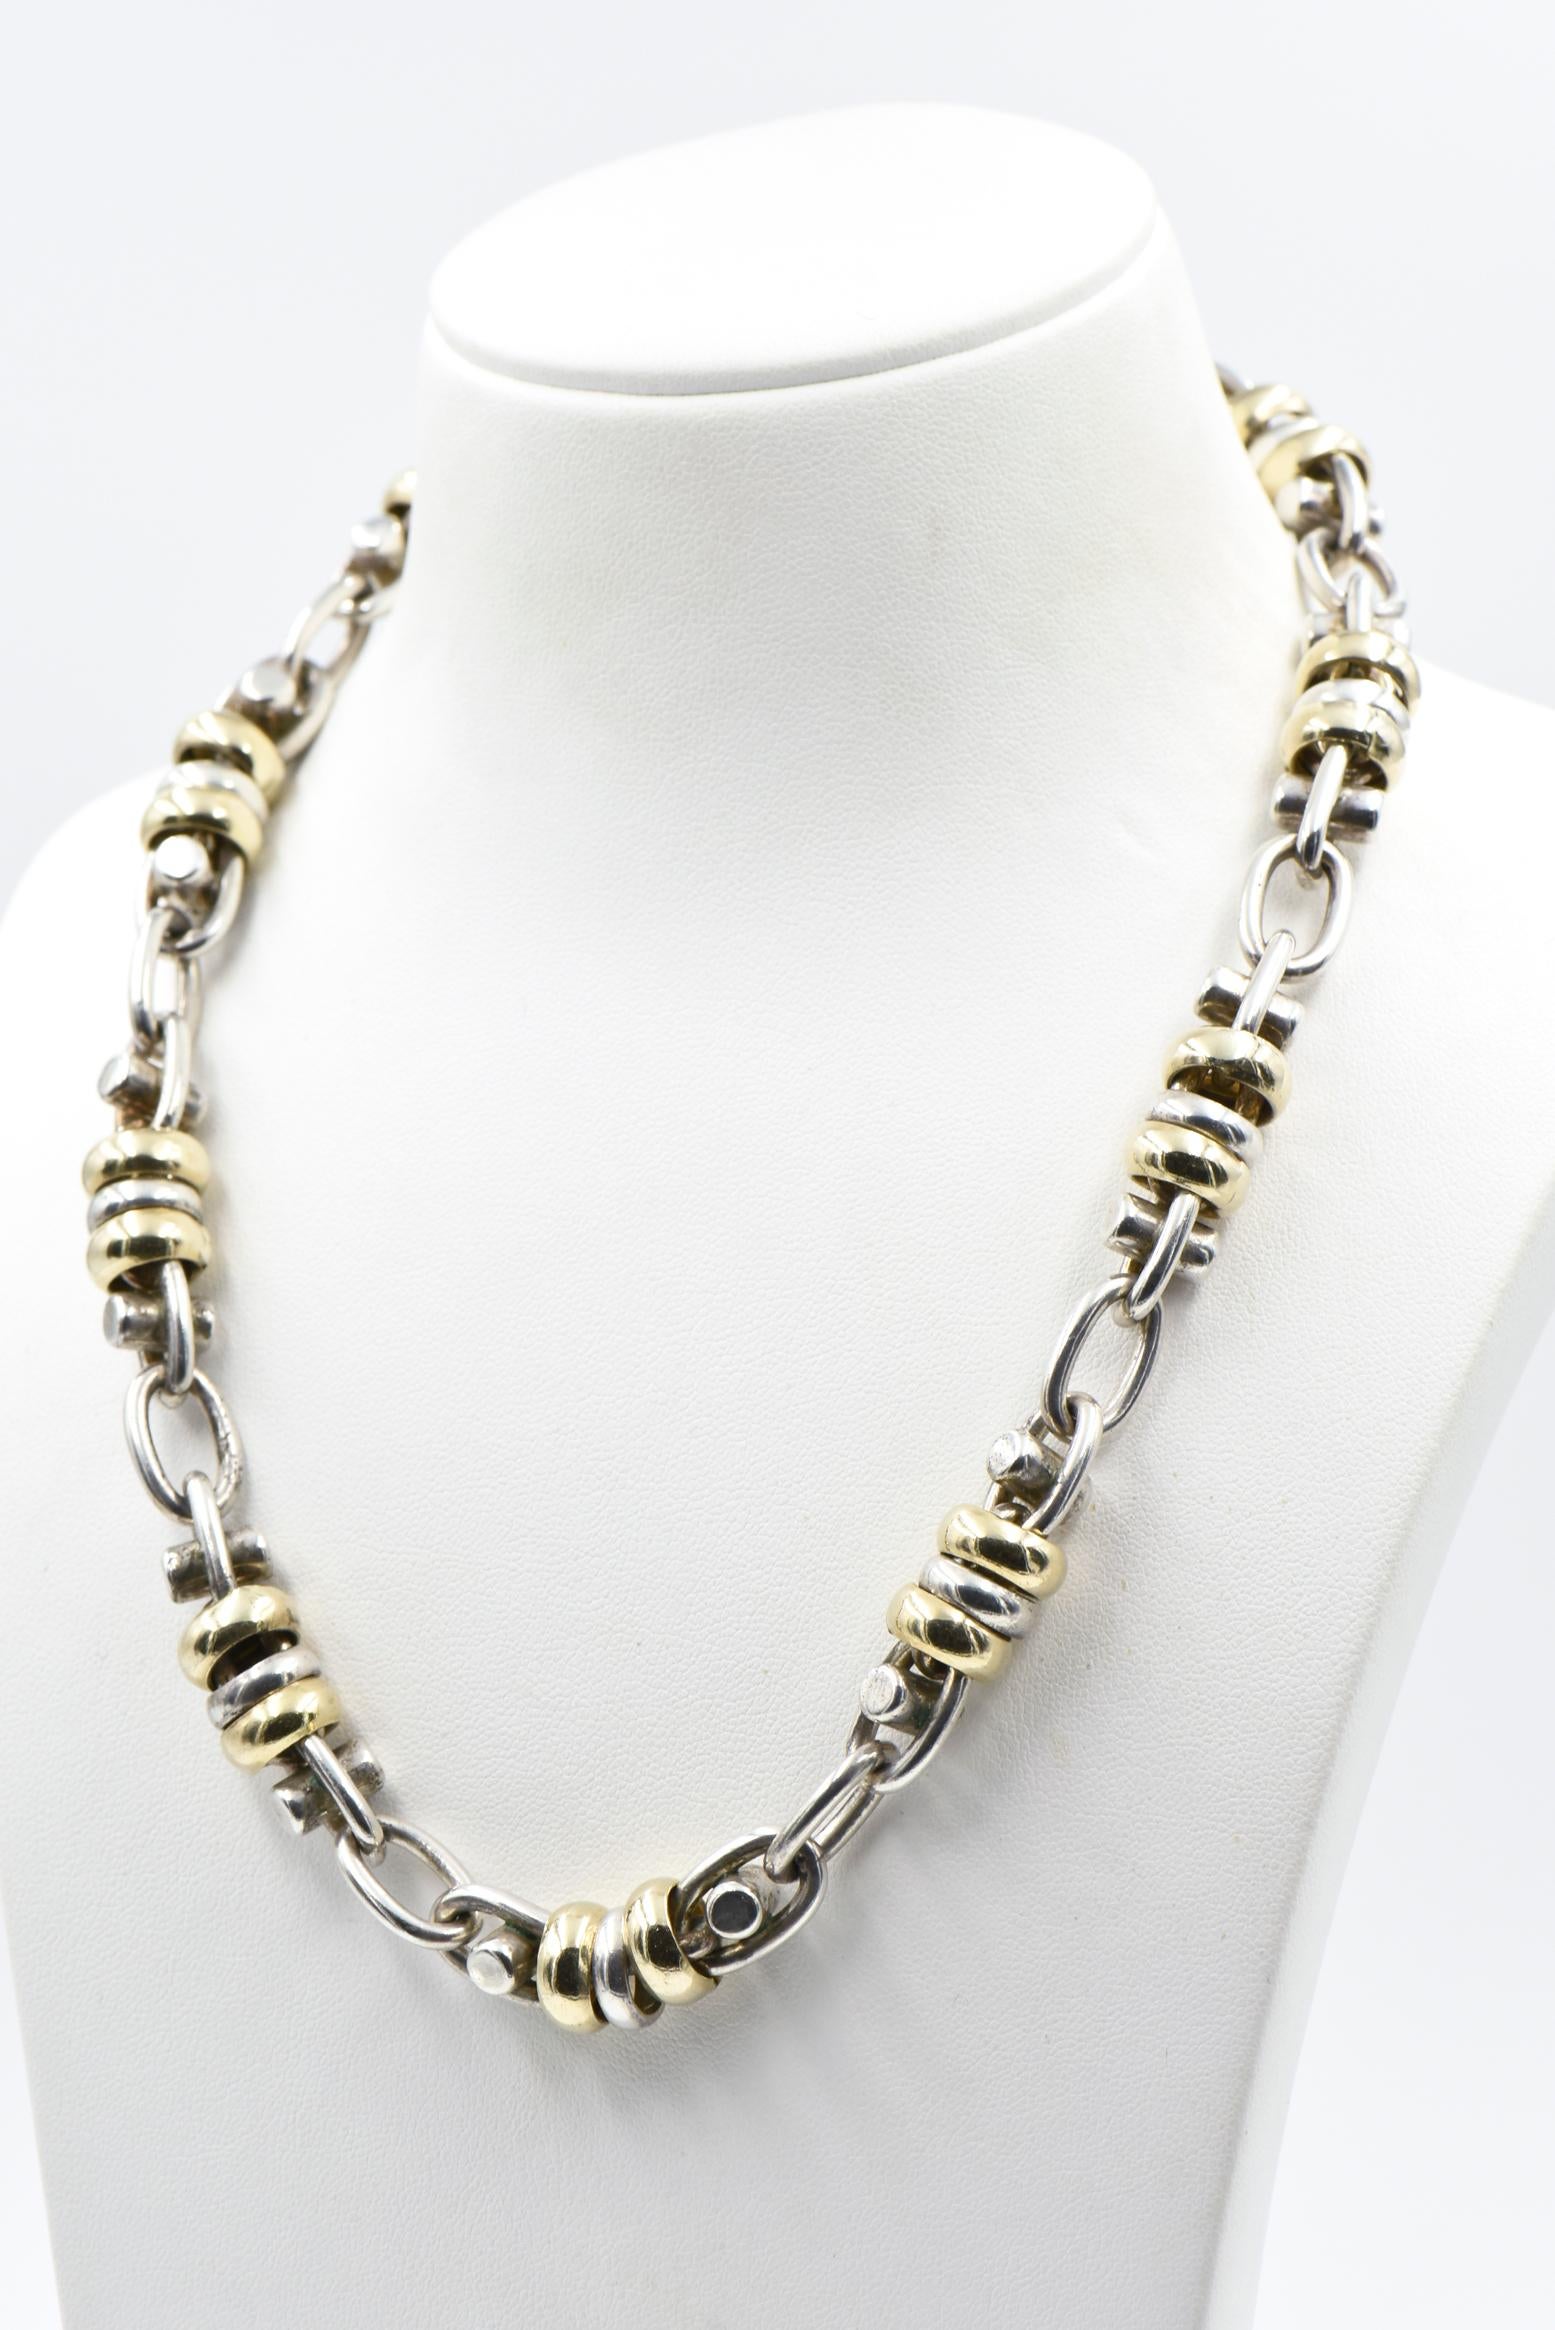 Women's or Men's Sterling and Gold-Plated Necklace